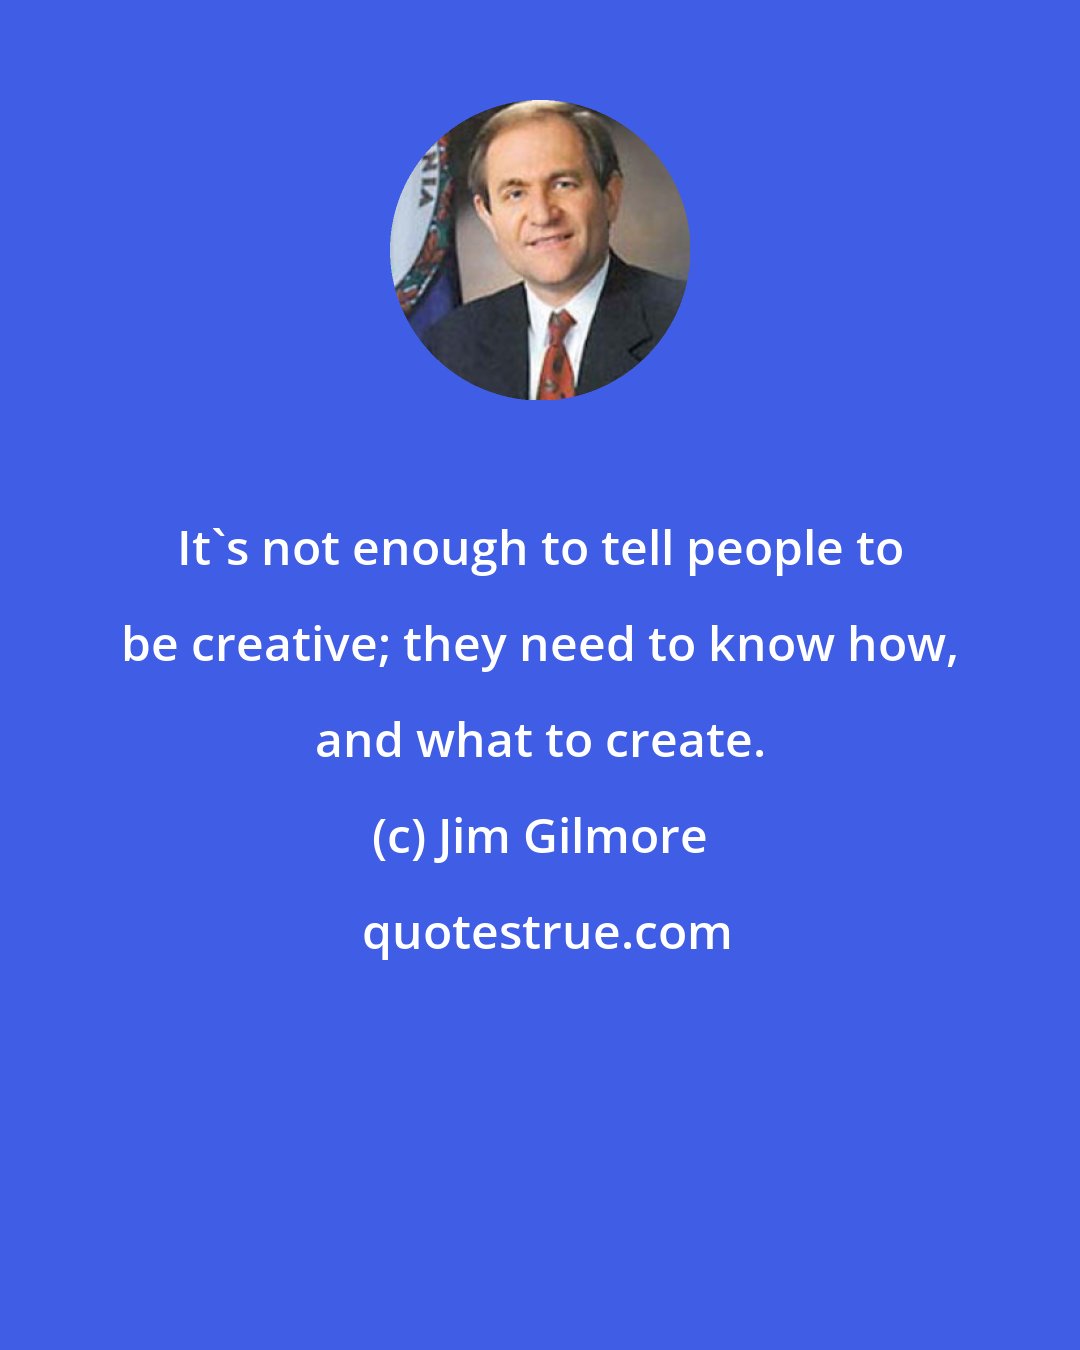 Jim Gilmore: It's not enough to tell people to be creative; they need to know how, and what to create.